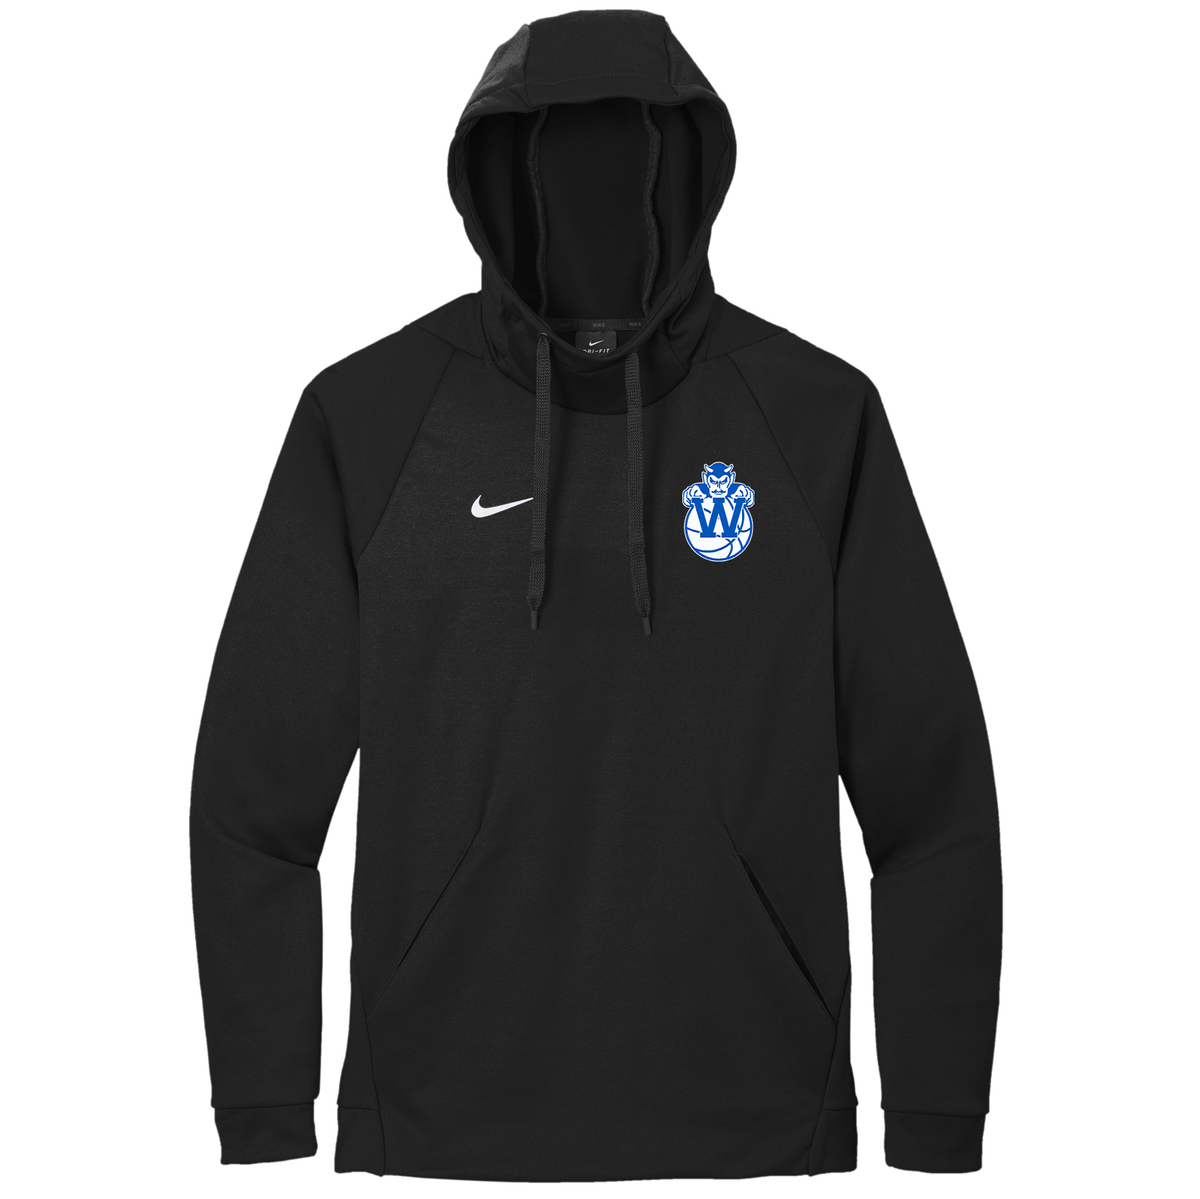 Westfield HS Basketball Nike Therma-FIT Embroidered Hoodie